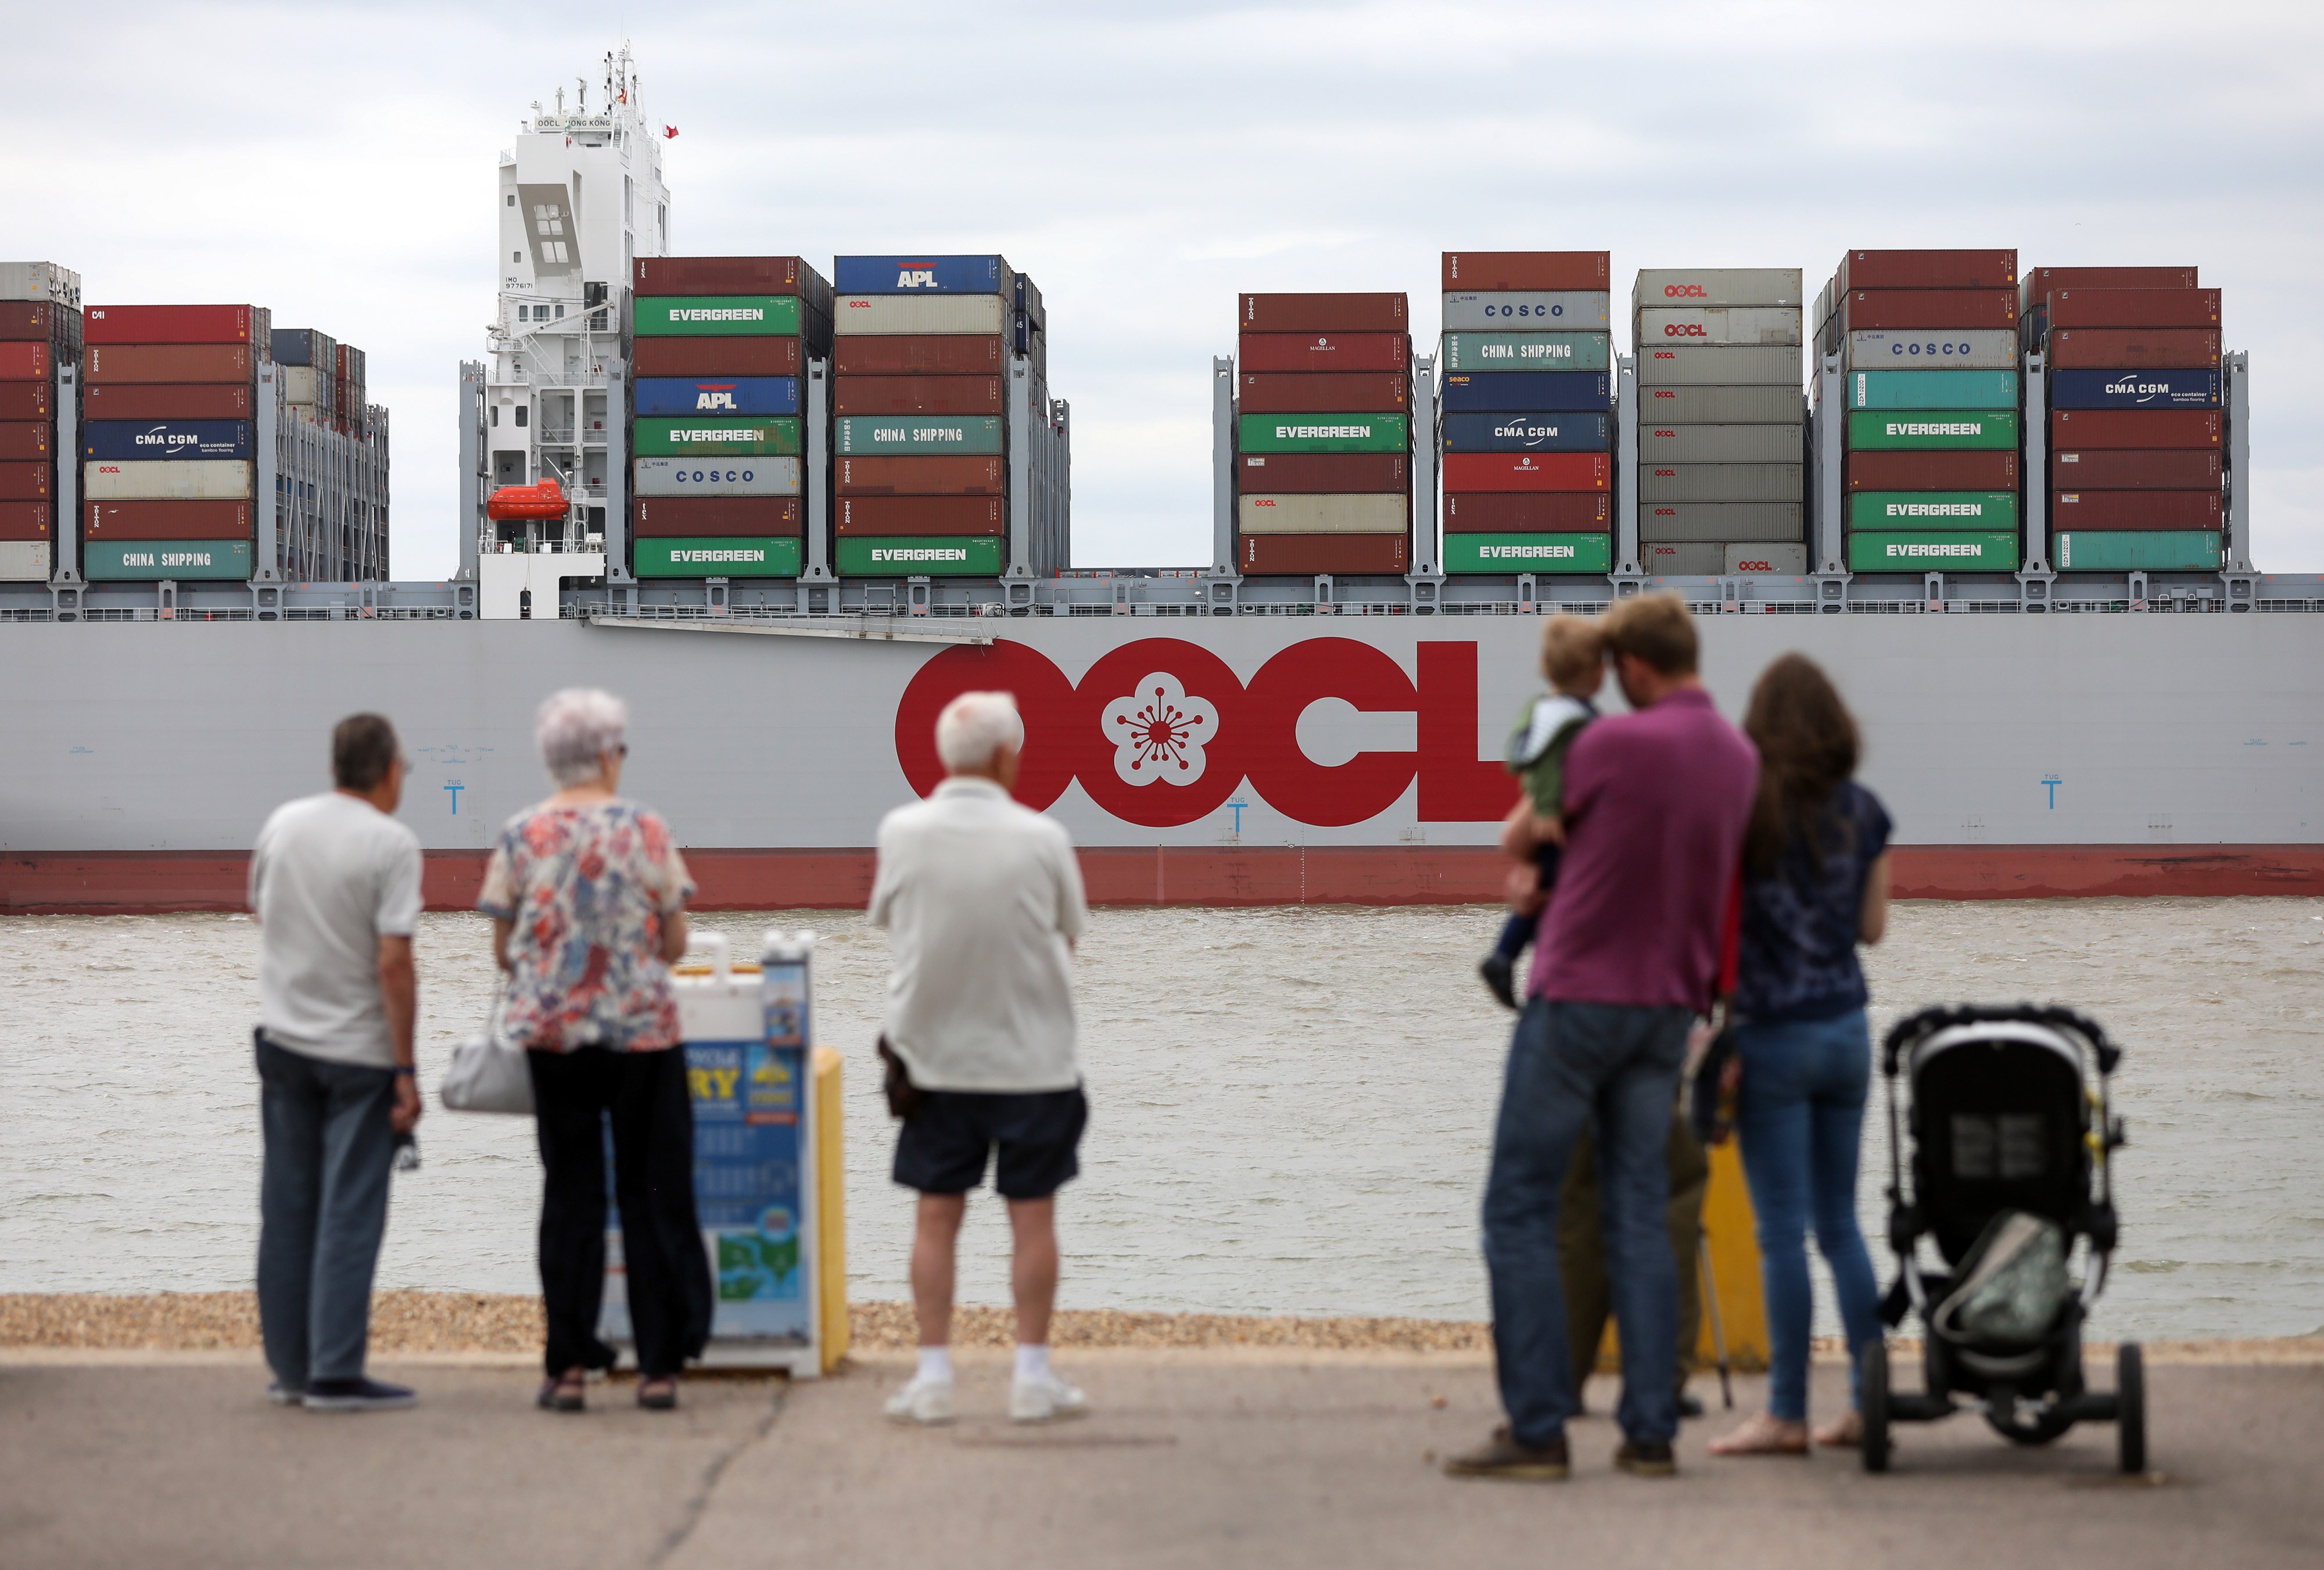 OOIL returned to profit in the first half of 2017 as the shipping industry improves. Orient Overseas Container Line is wholly-owned by OOIL. Photo: Bloomberg